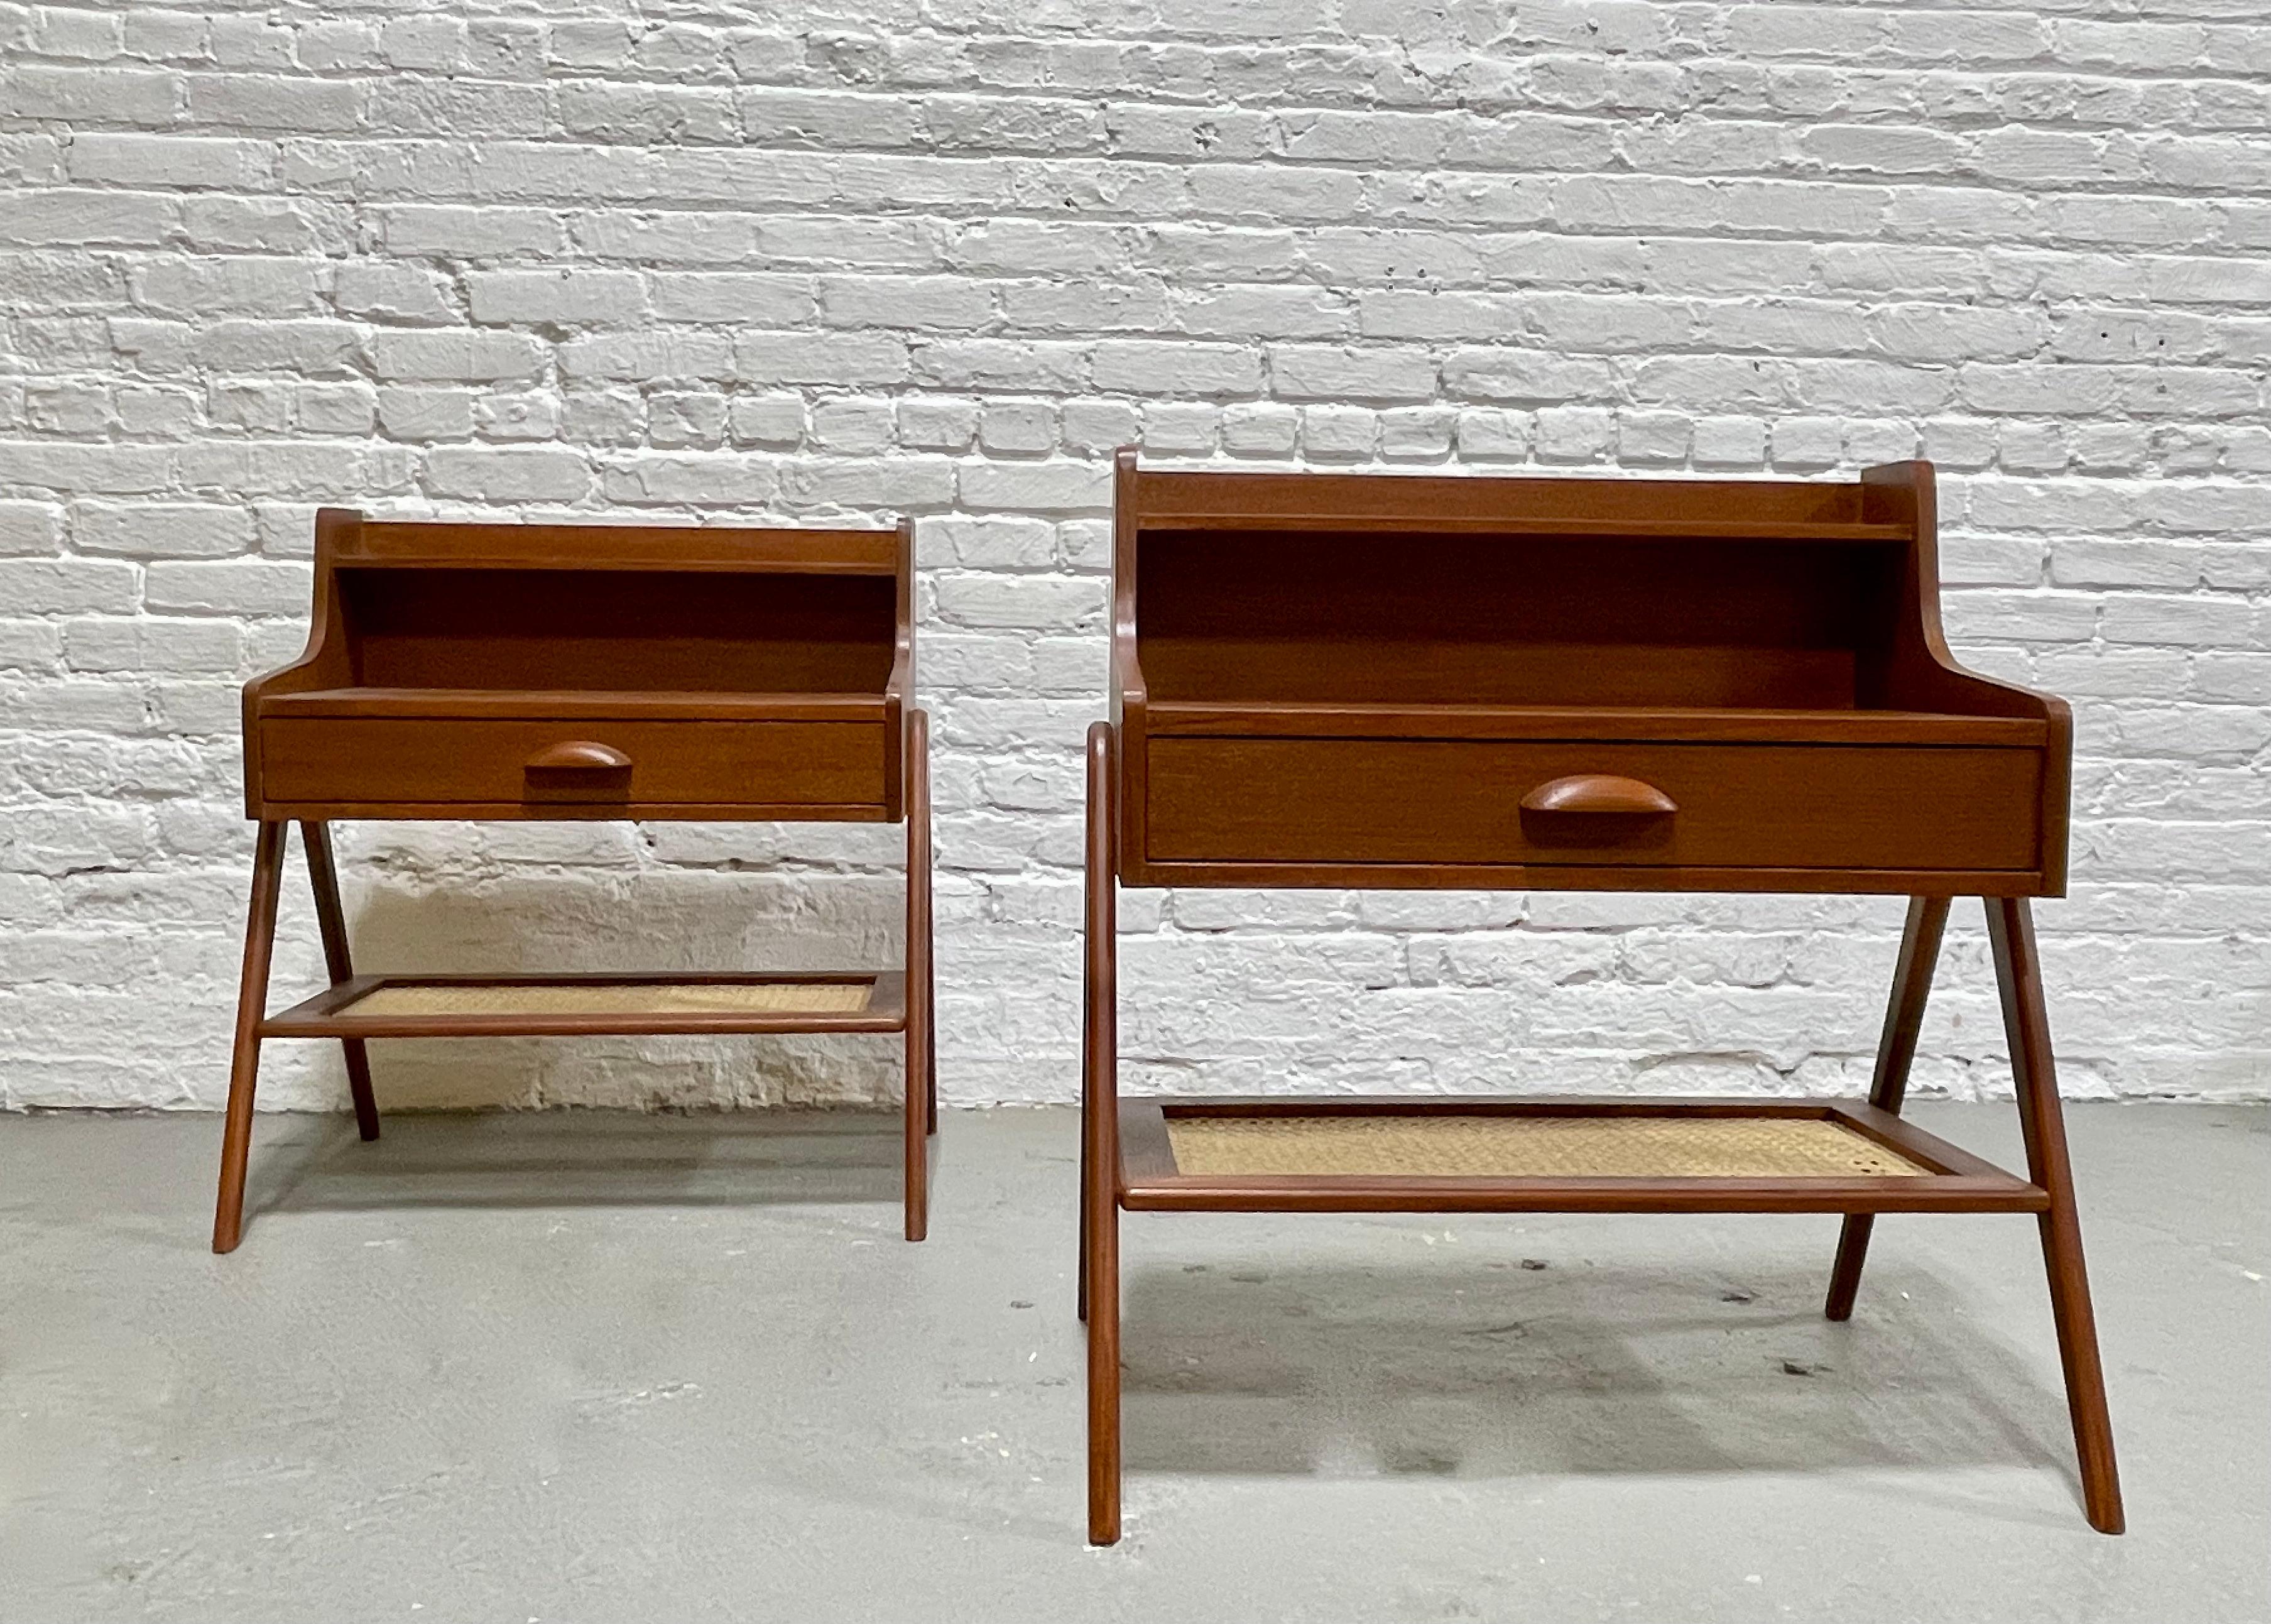 Pair of Mid-Century Modern Handcrafted Caned Teak Cabinets / Entryway Tables For Sale 5